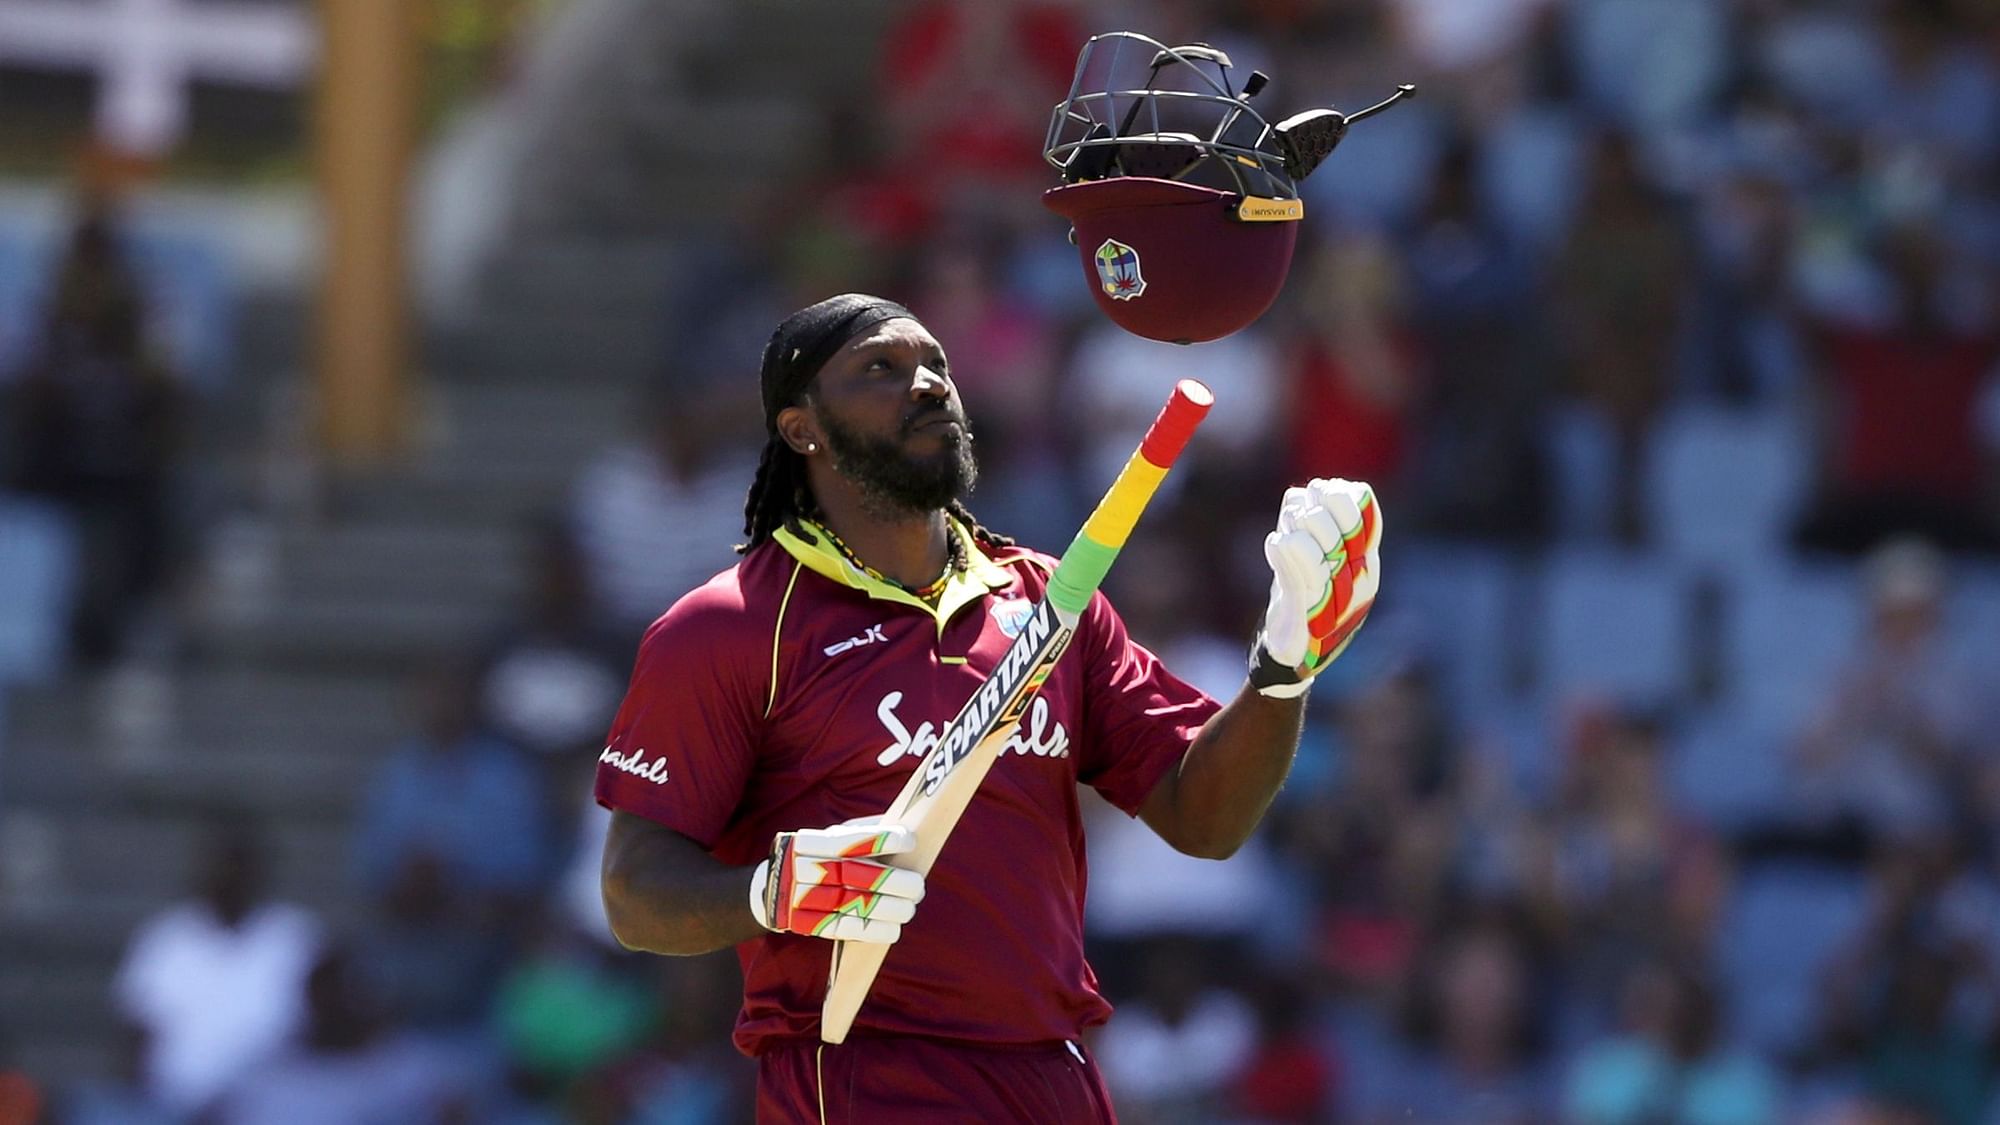 Chris Gayle struck a brutal 77 as West Indies crushed England to win the fifth and final one-day international by seven wickets.